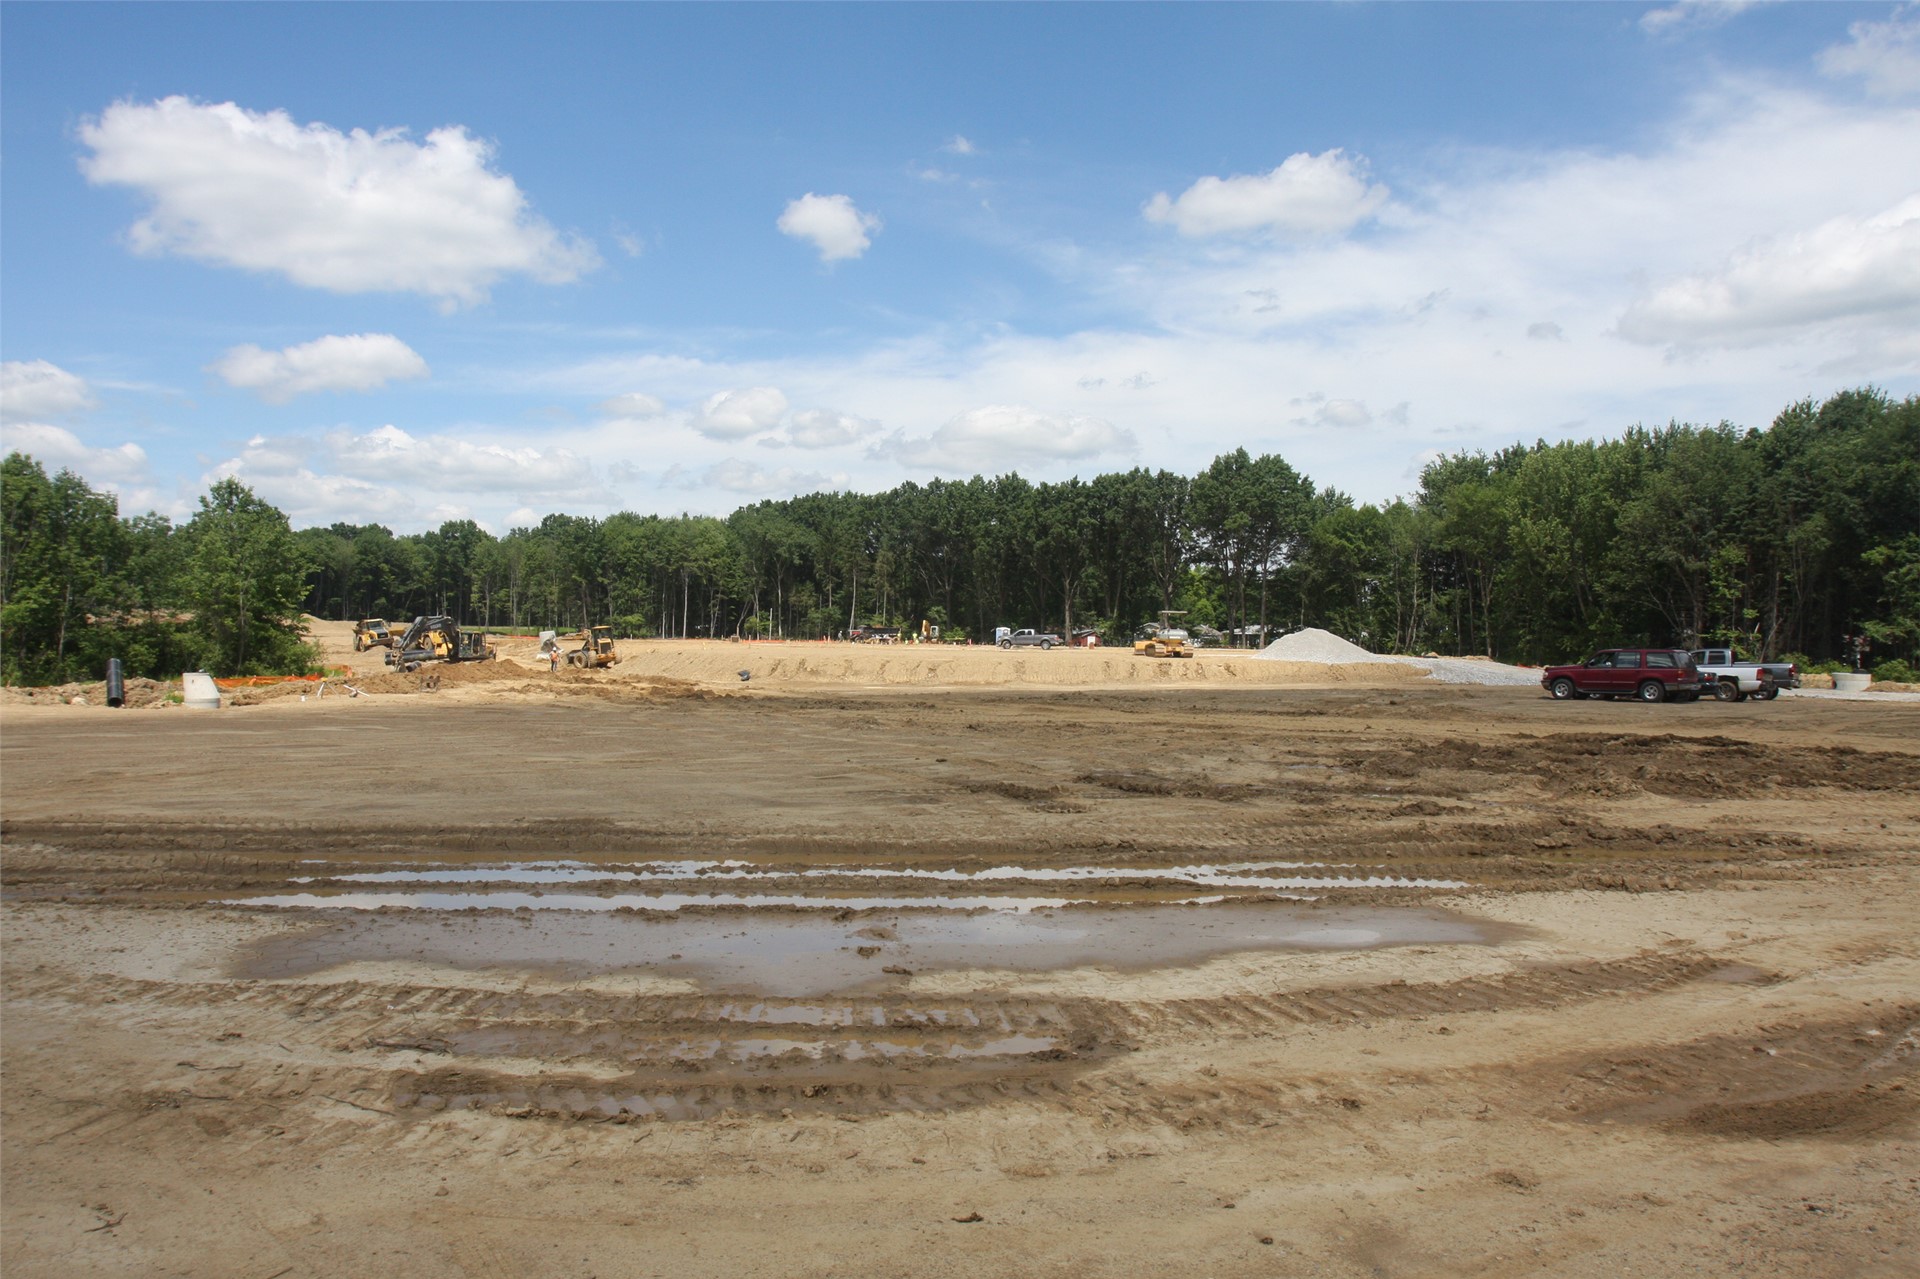 Building pad in distance, staff parking lot in foreground